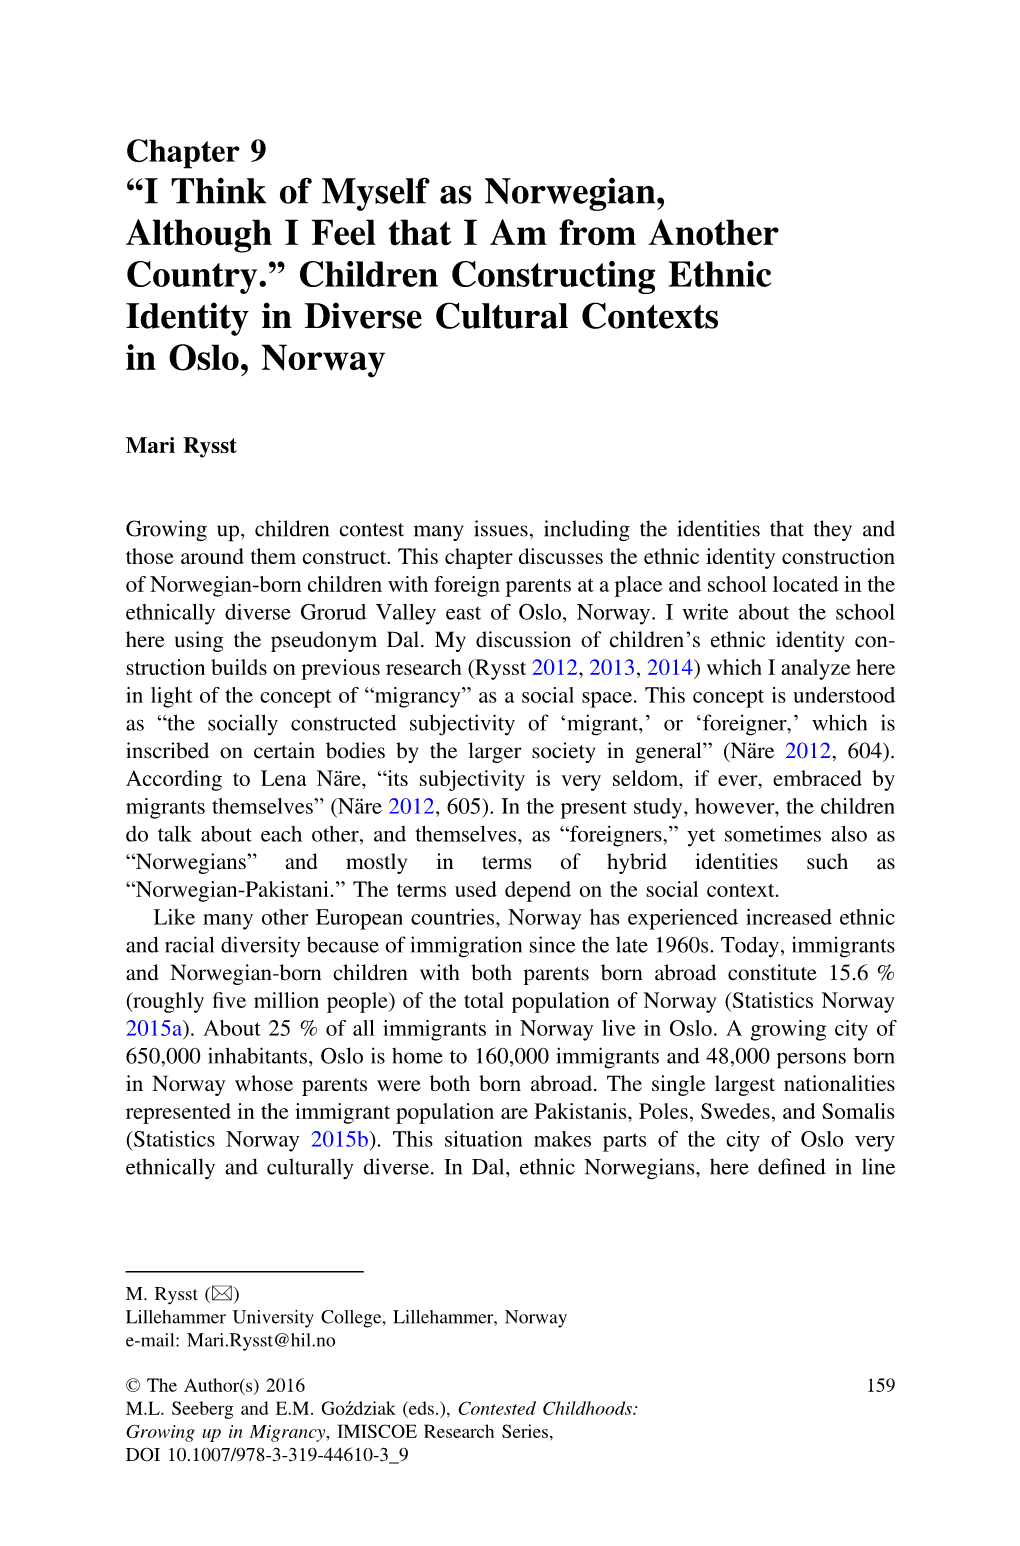 Children Constructing Ethnic Identity in Diverse Cultural Contexts in Oslo, Norway